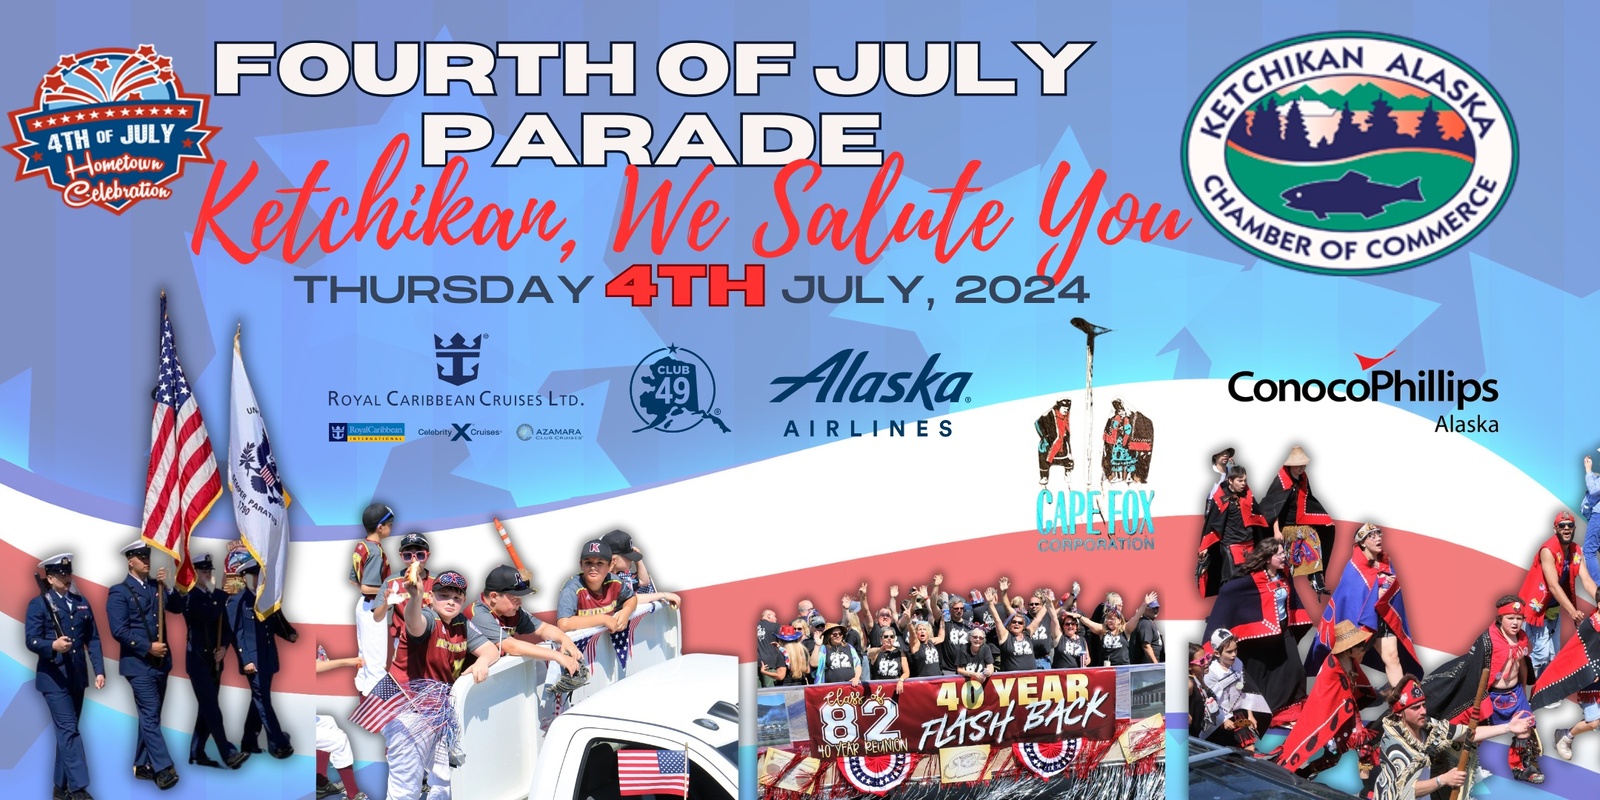 Banner image for 2024 Fourth of July Parade:  "Ketchikan, We Salute You!"